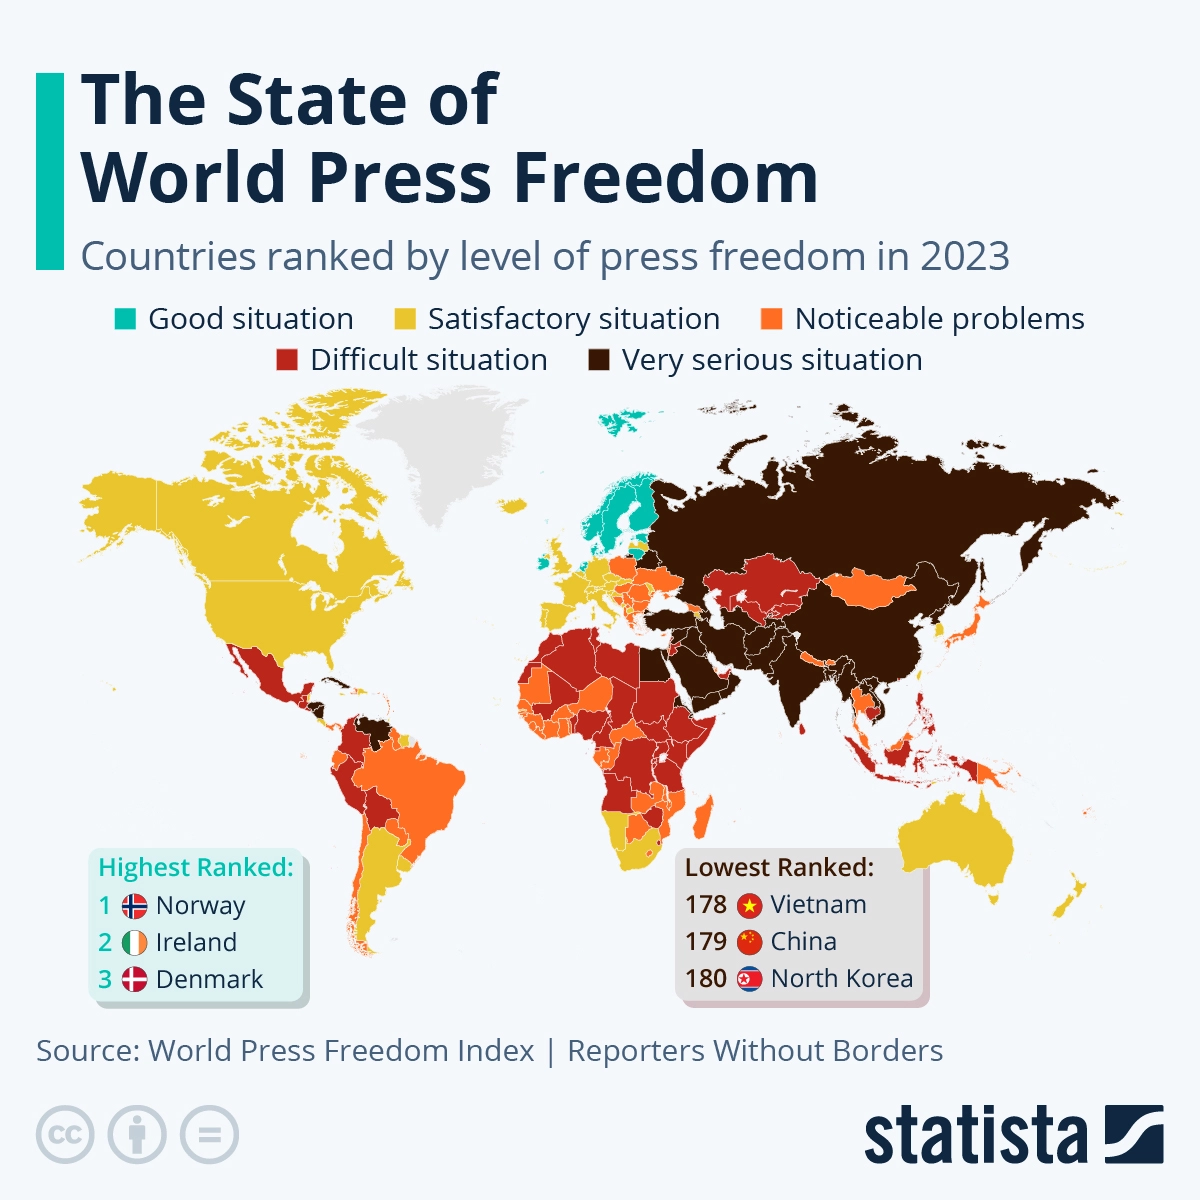 The state of world press freedom